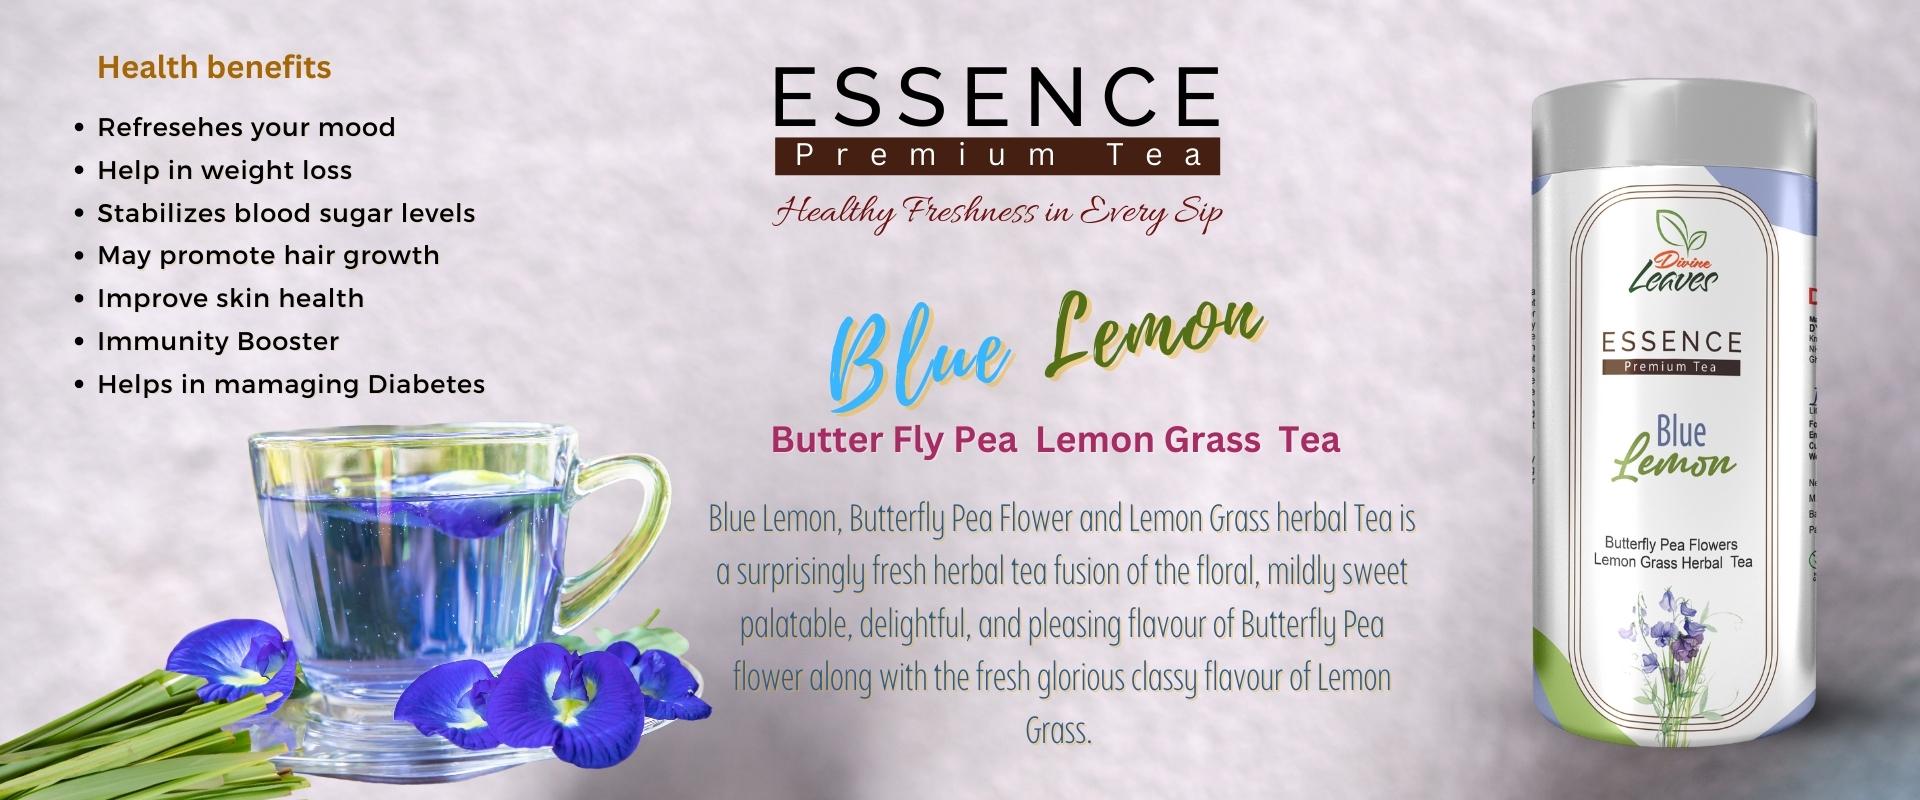  Butterfly Pea,  Blue Tea Help in weight loss, refreshes your mood, hair growth